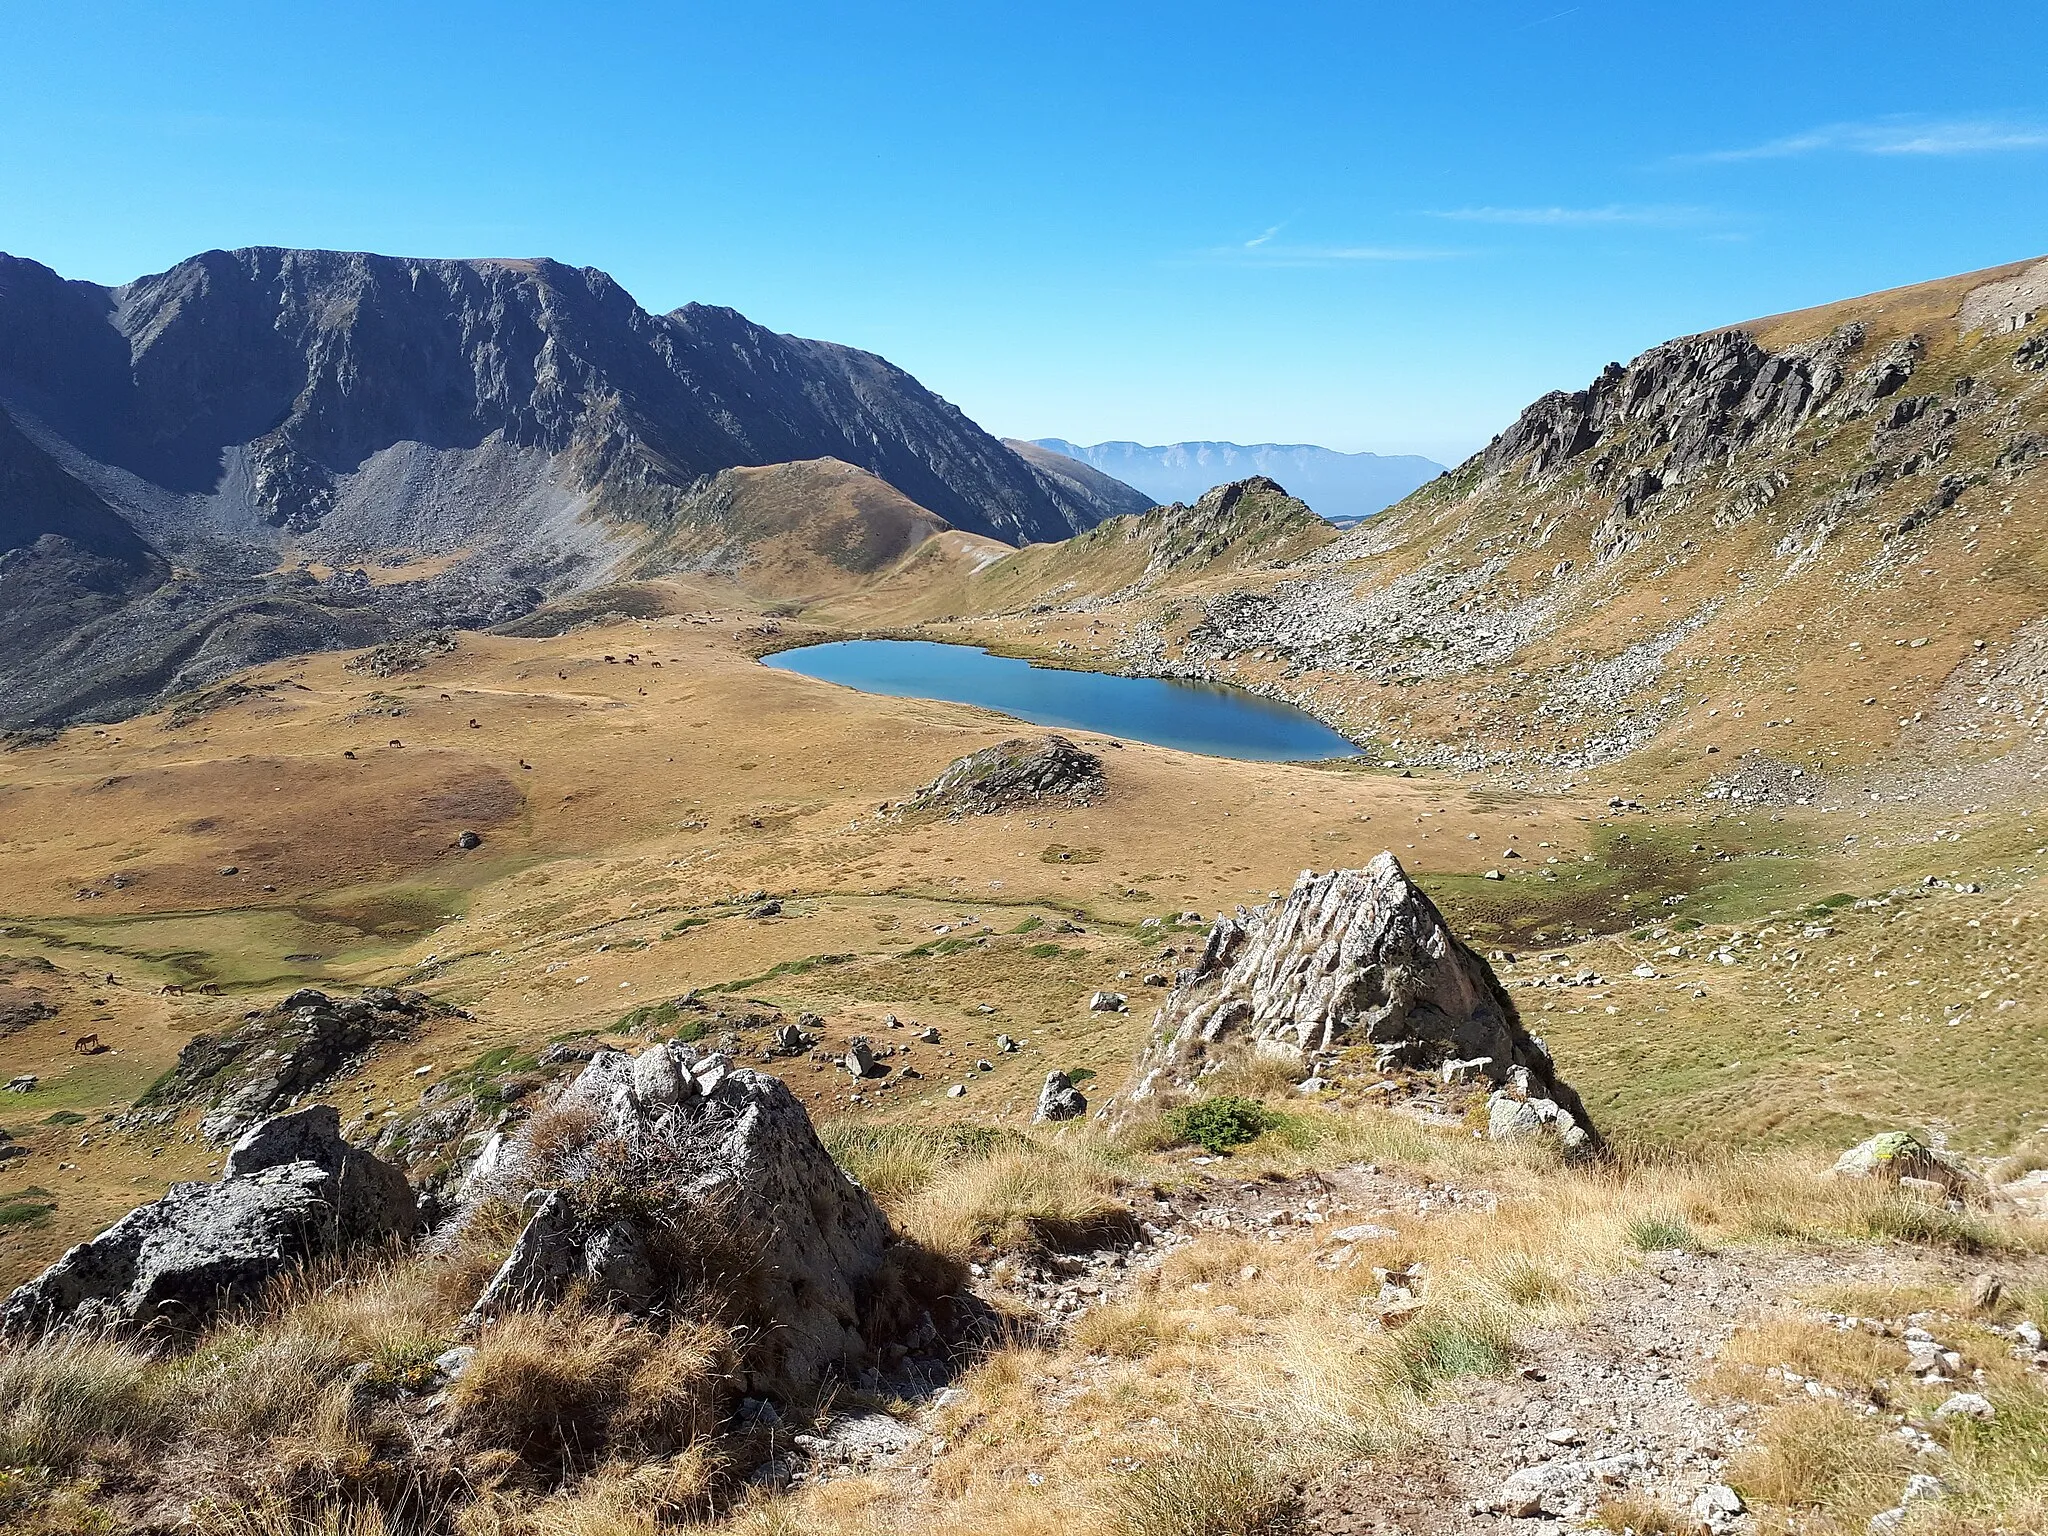 Photo showing: The lake, at an altitude of about 2560 metres, is the source of the Ribera de Campcardos river. That river runs eastwards down the deep, glaciated Campcardos valley, and its waters run into the el Segre river near Puigcerdà.
The col beyond the lake is the Portella Blanca d'Andorra, where the frontiers of France, Spain and Andorra meet.
The peak on the left is the Pic de Camp Colomer (2869 metres).
This area lies within the Mont-Louis - Andorra granite massif. That granite pluton is of Hercynian age (about 300Ma).

The valley serves as upland summer pasture. A herd of horses can be seen grazing near the lake.